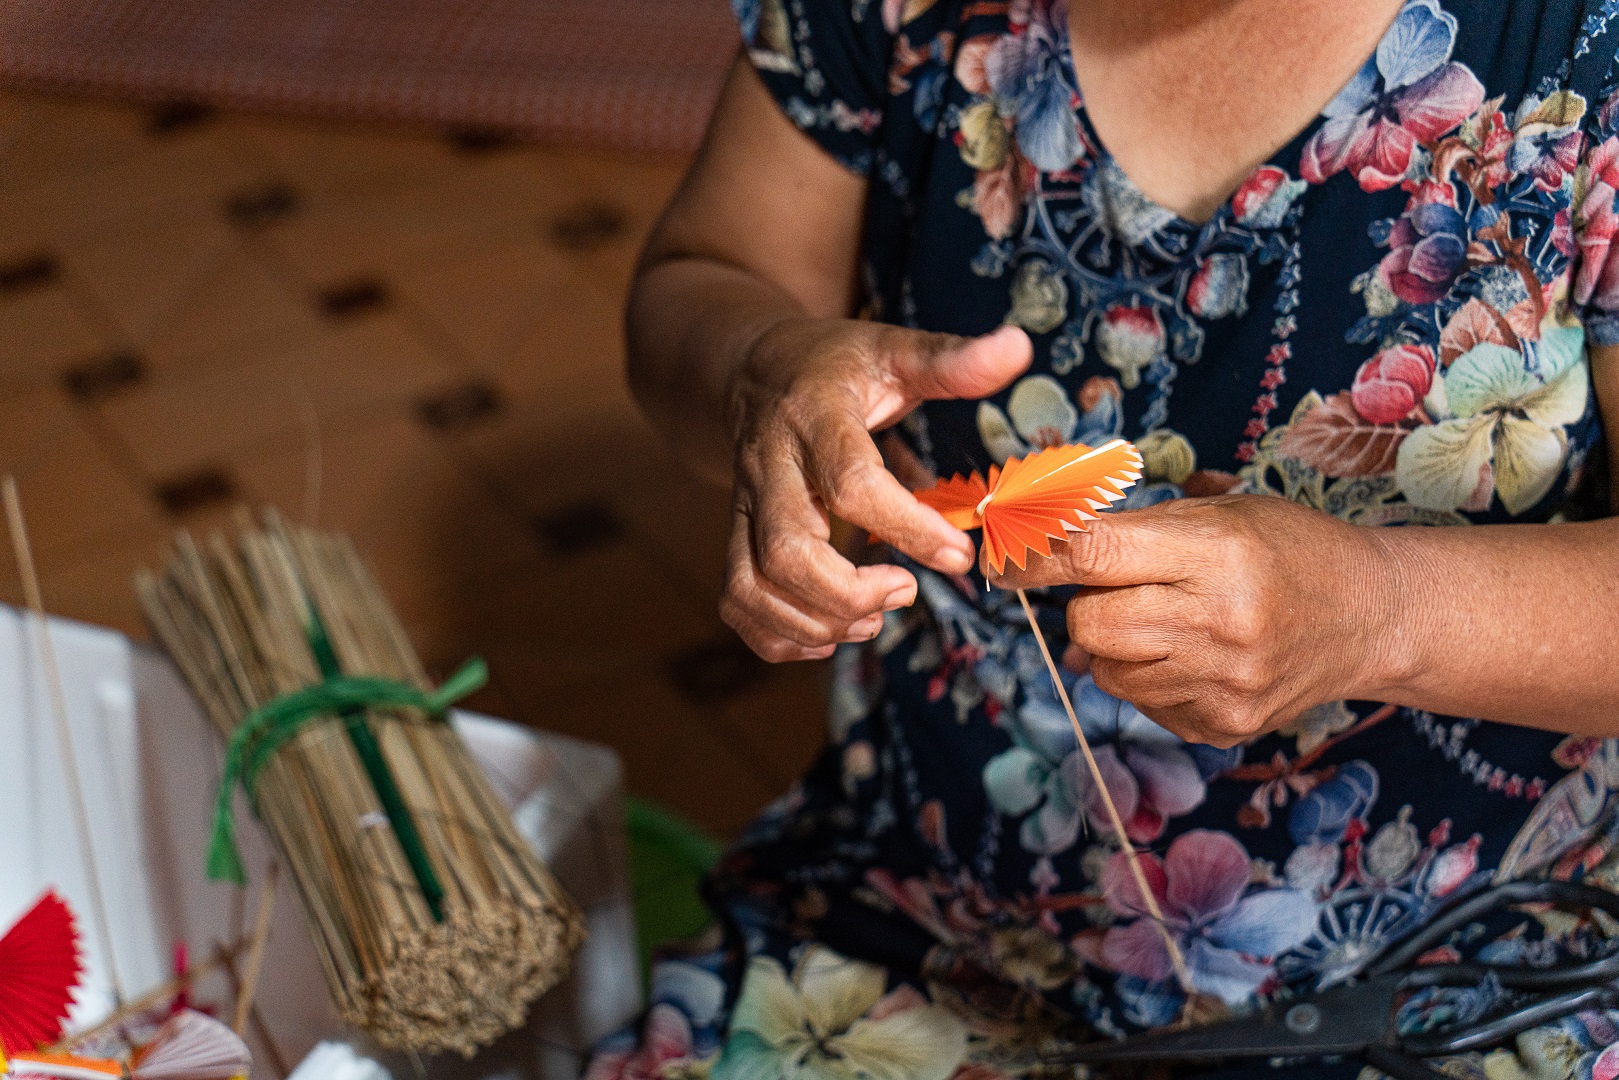 Artisans in the village are friendly and hospitable. They are willing to instruct visitors to make paper flowers and share their stories during the journey of making paper flowers. Photo: Nguyen Trung Au / Tuoi Tre News